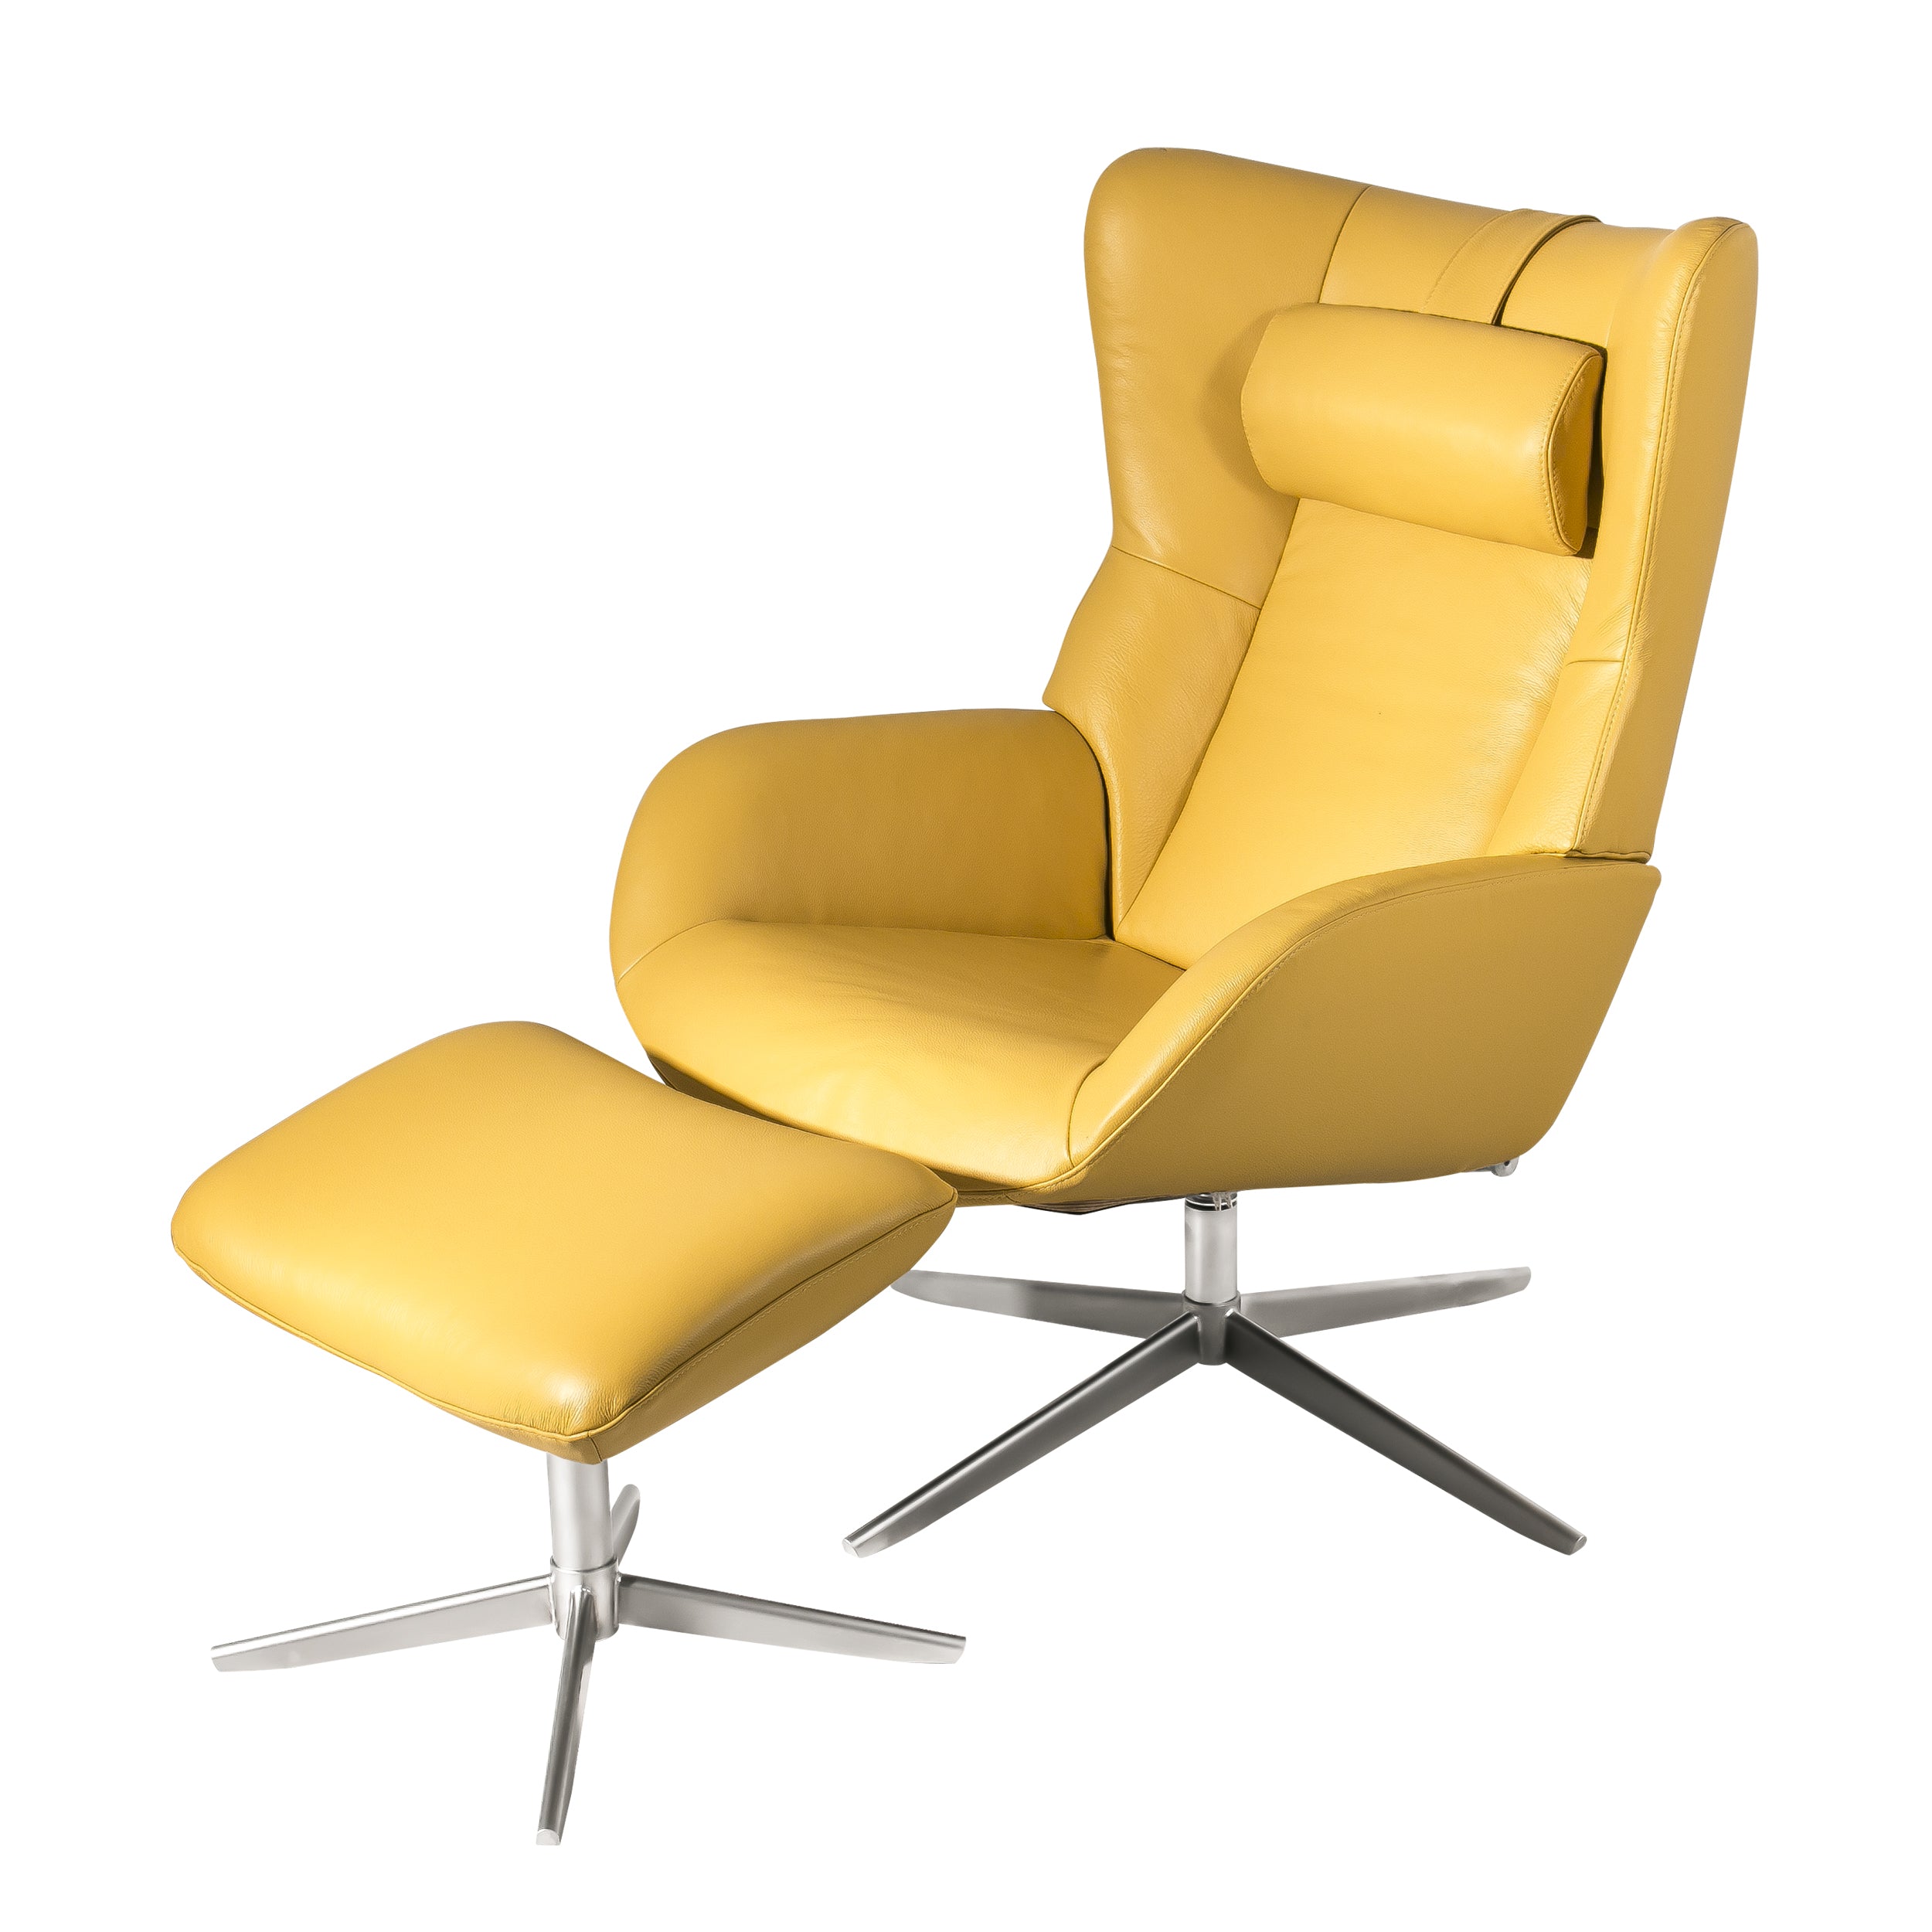 Relaxfauteuil Thimo